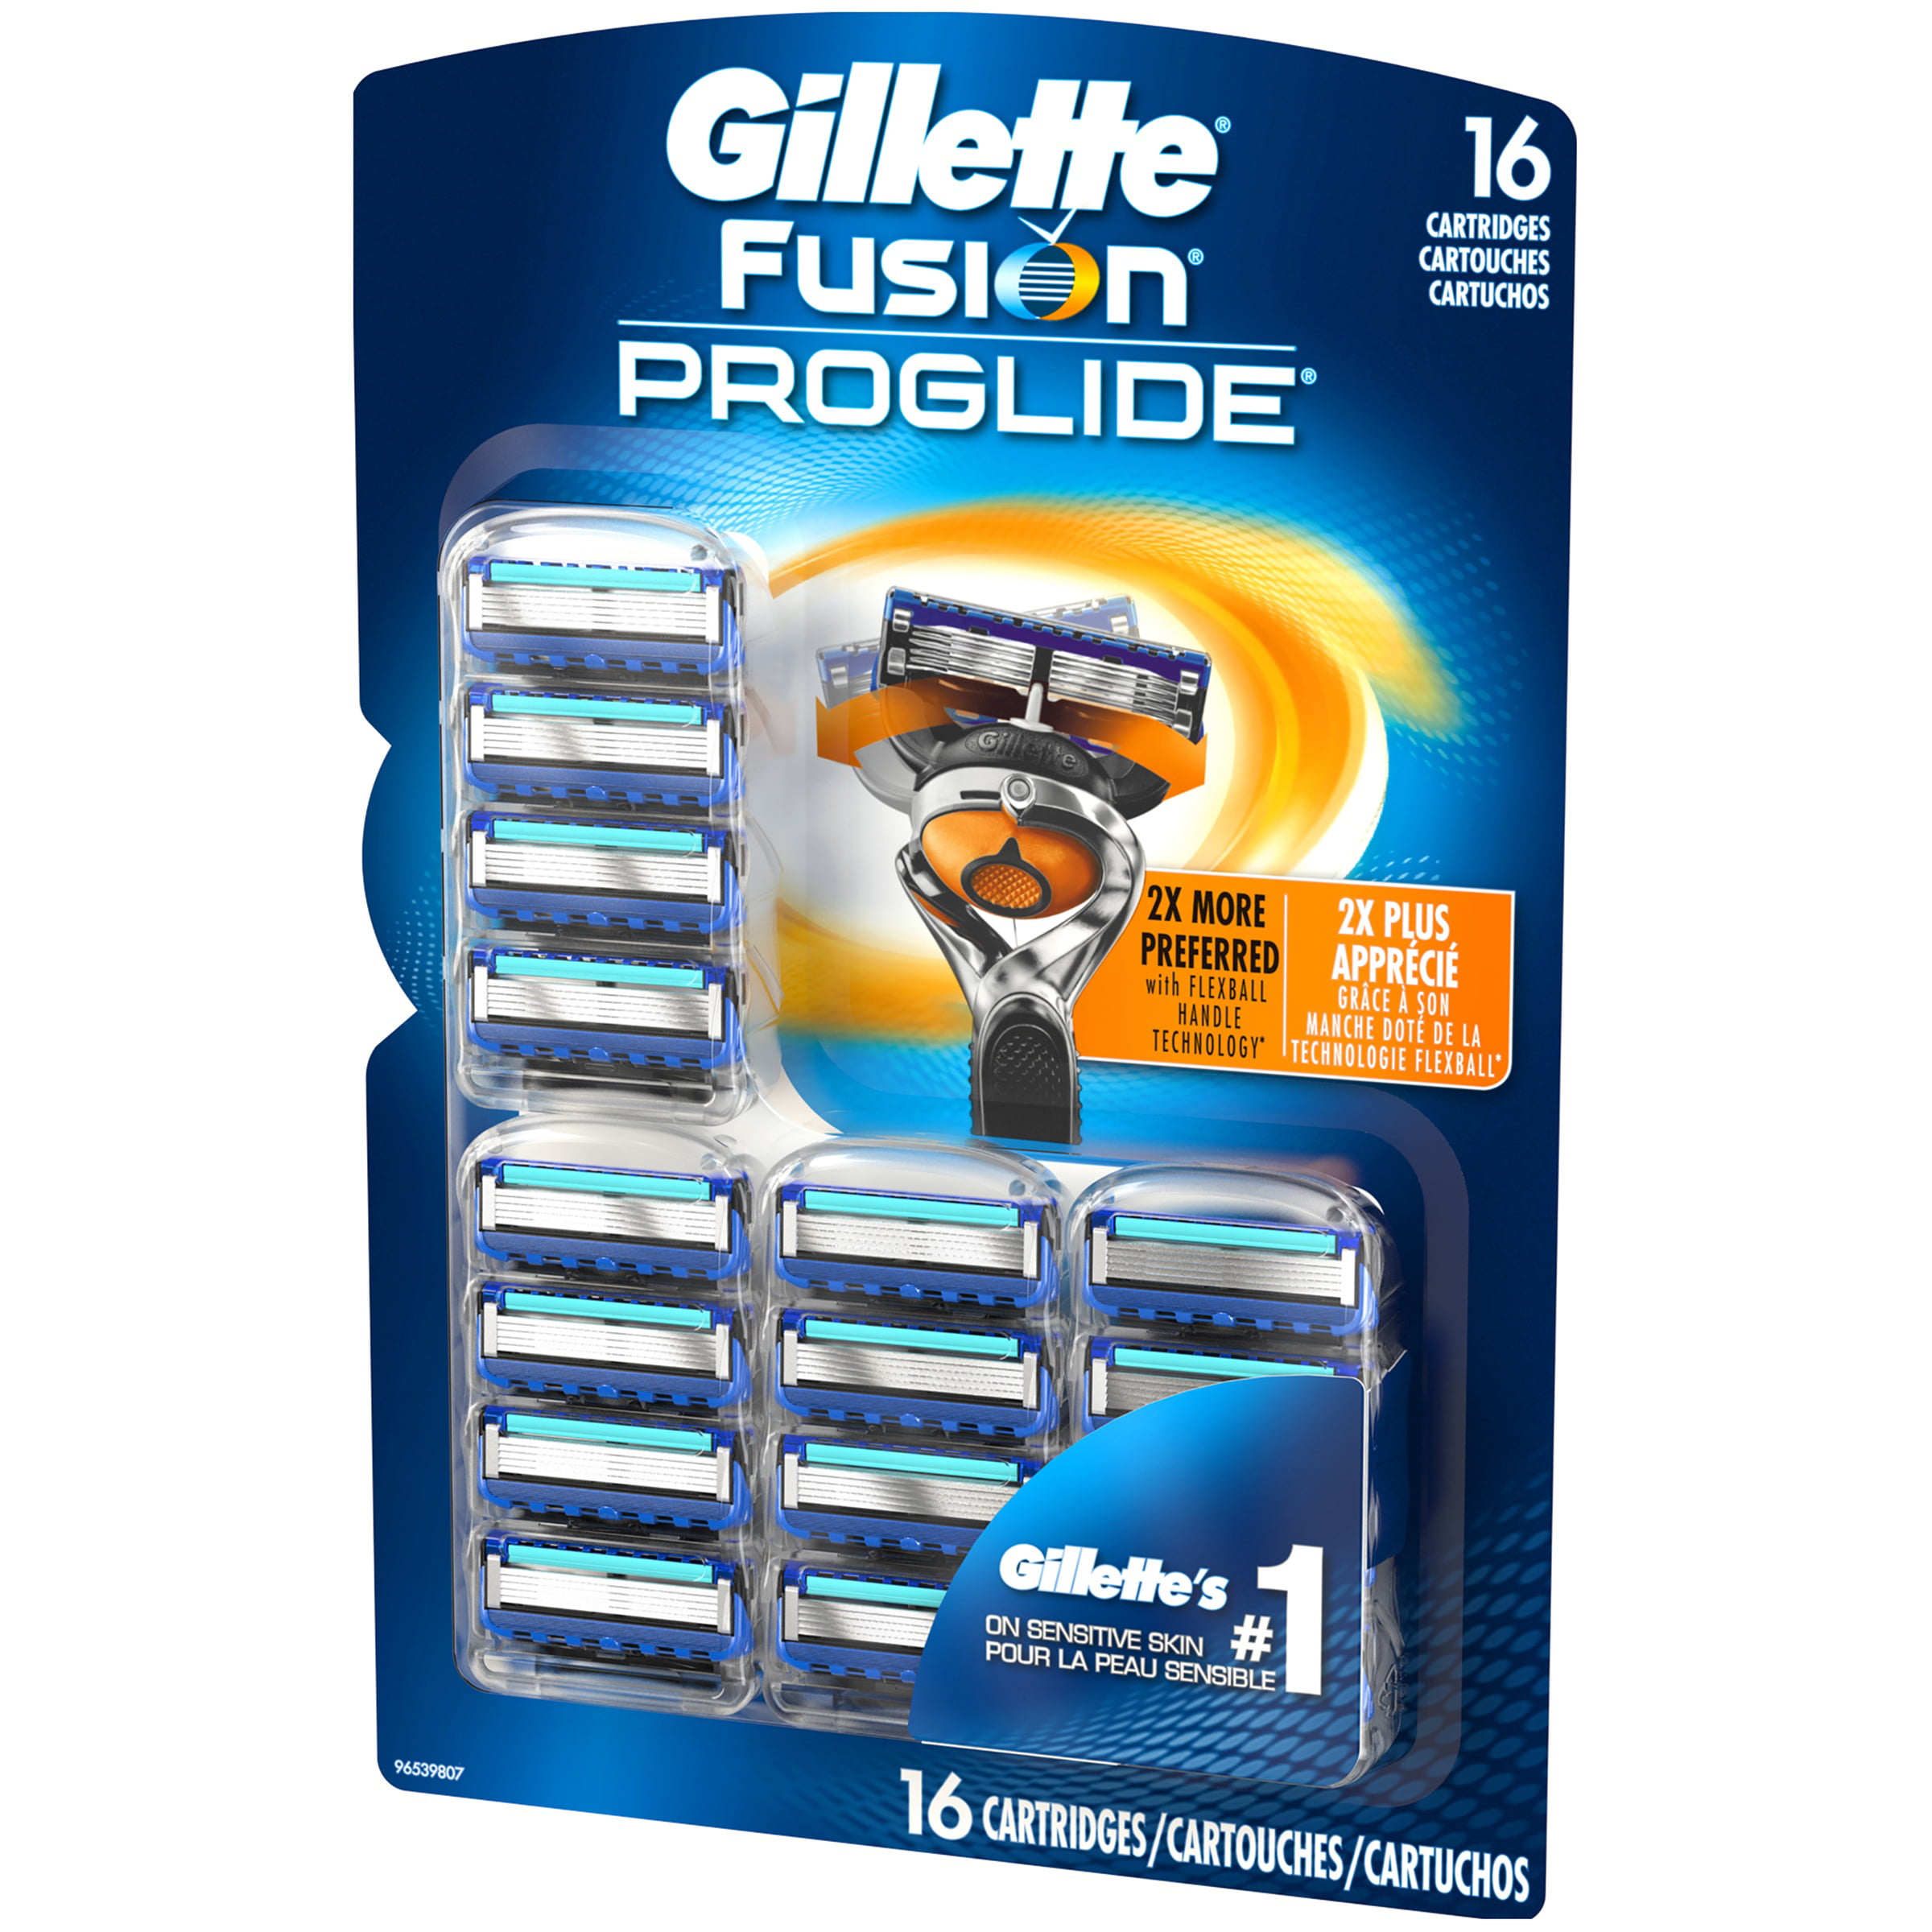 Gillette Fusion Offers